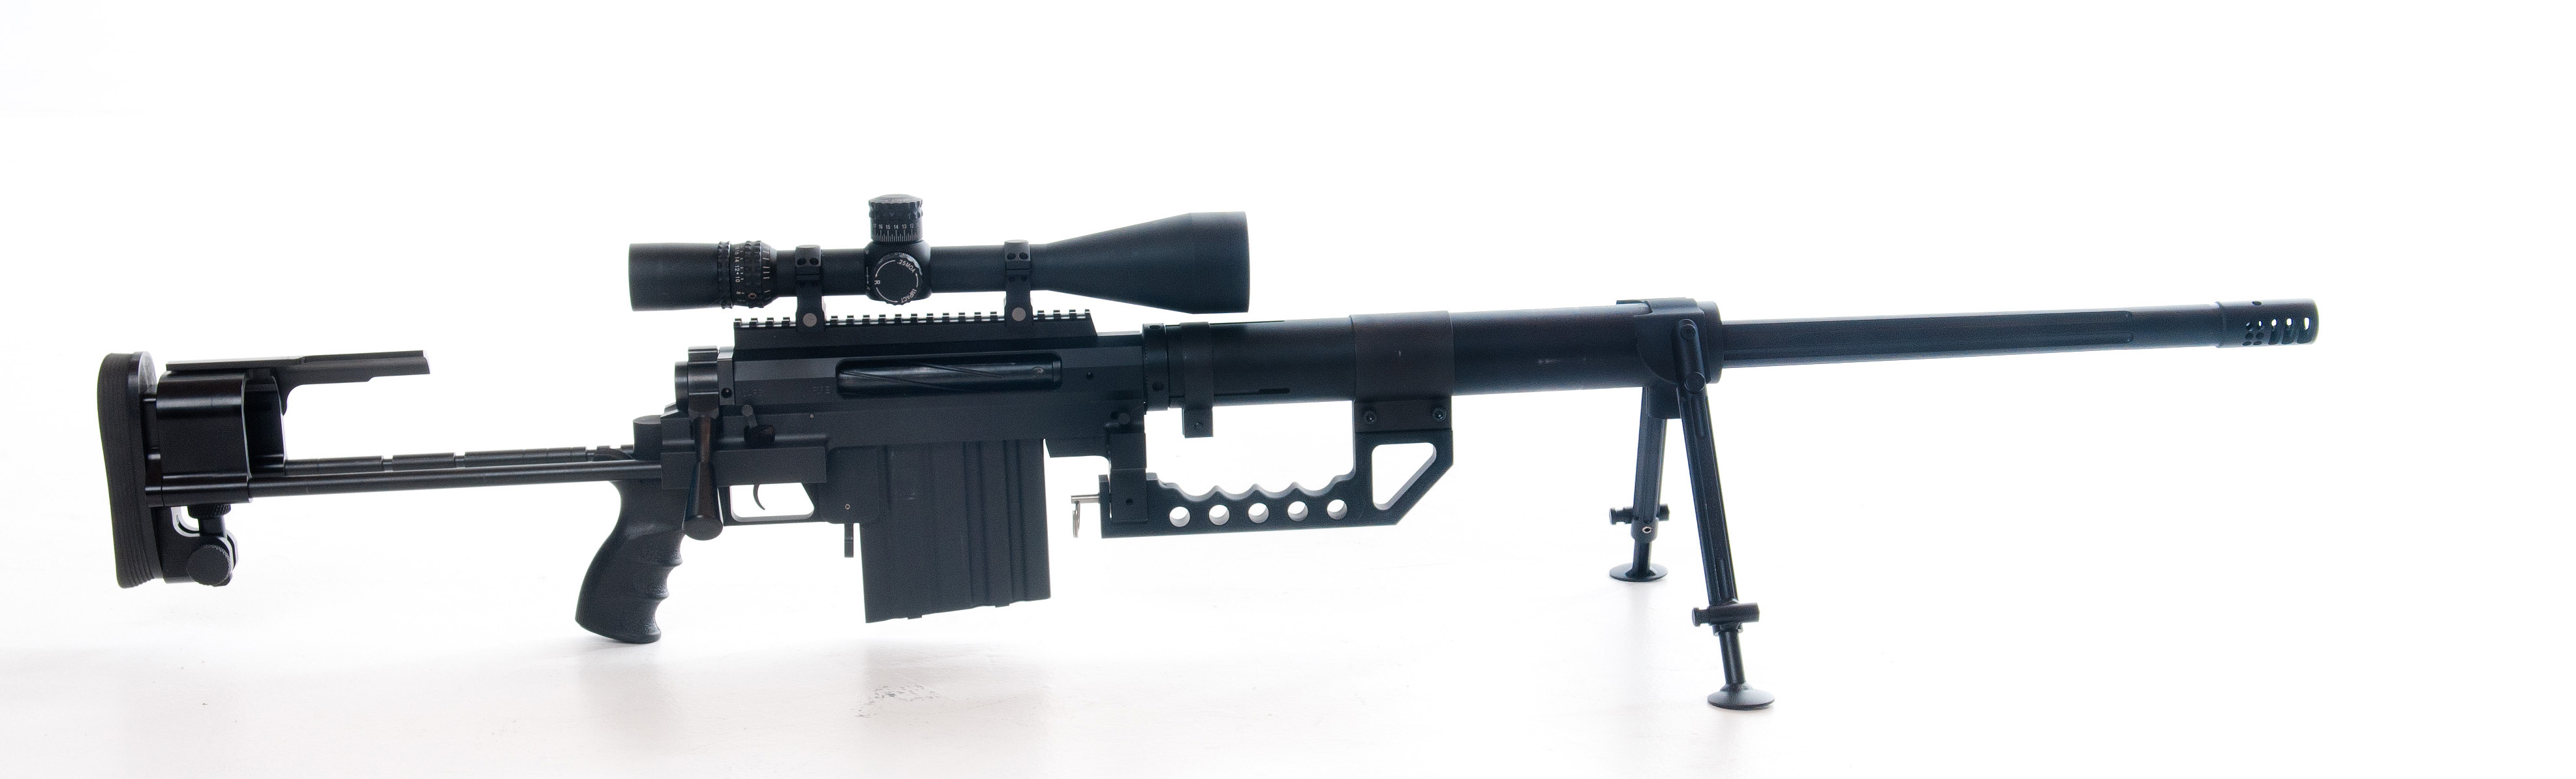 Cheytac M0 Intervention Sniper Rifle Hd Wallpaper Background Image 3948x1194 Id 3491 Wallpaper Abyss